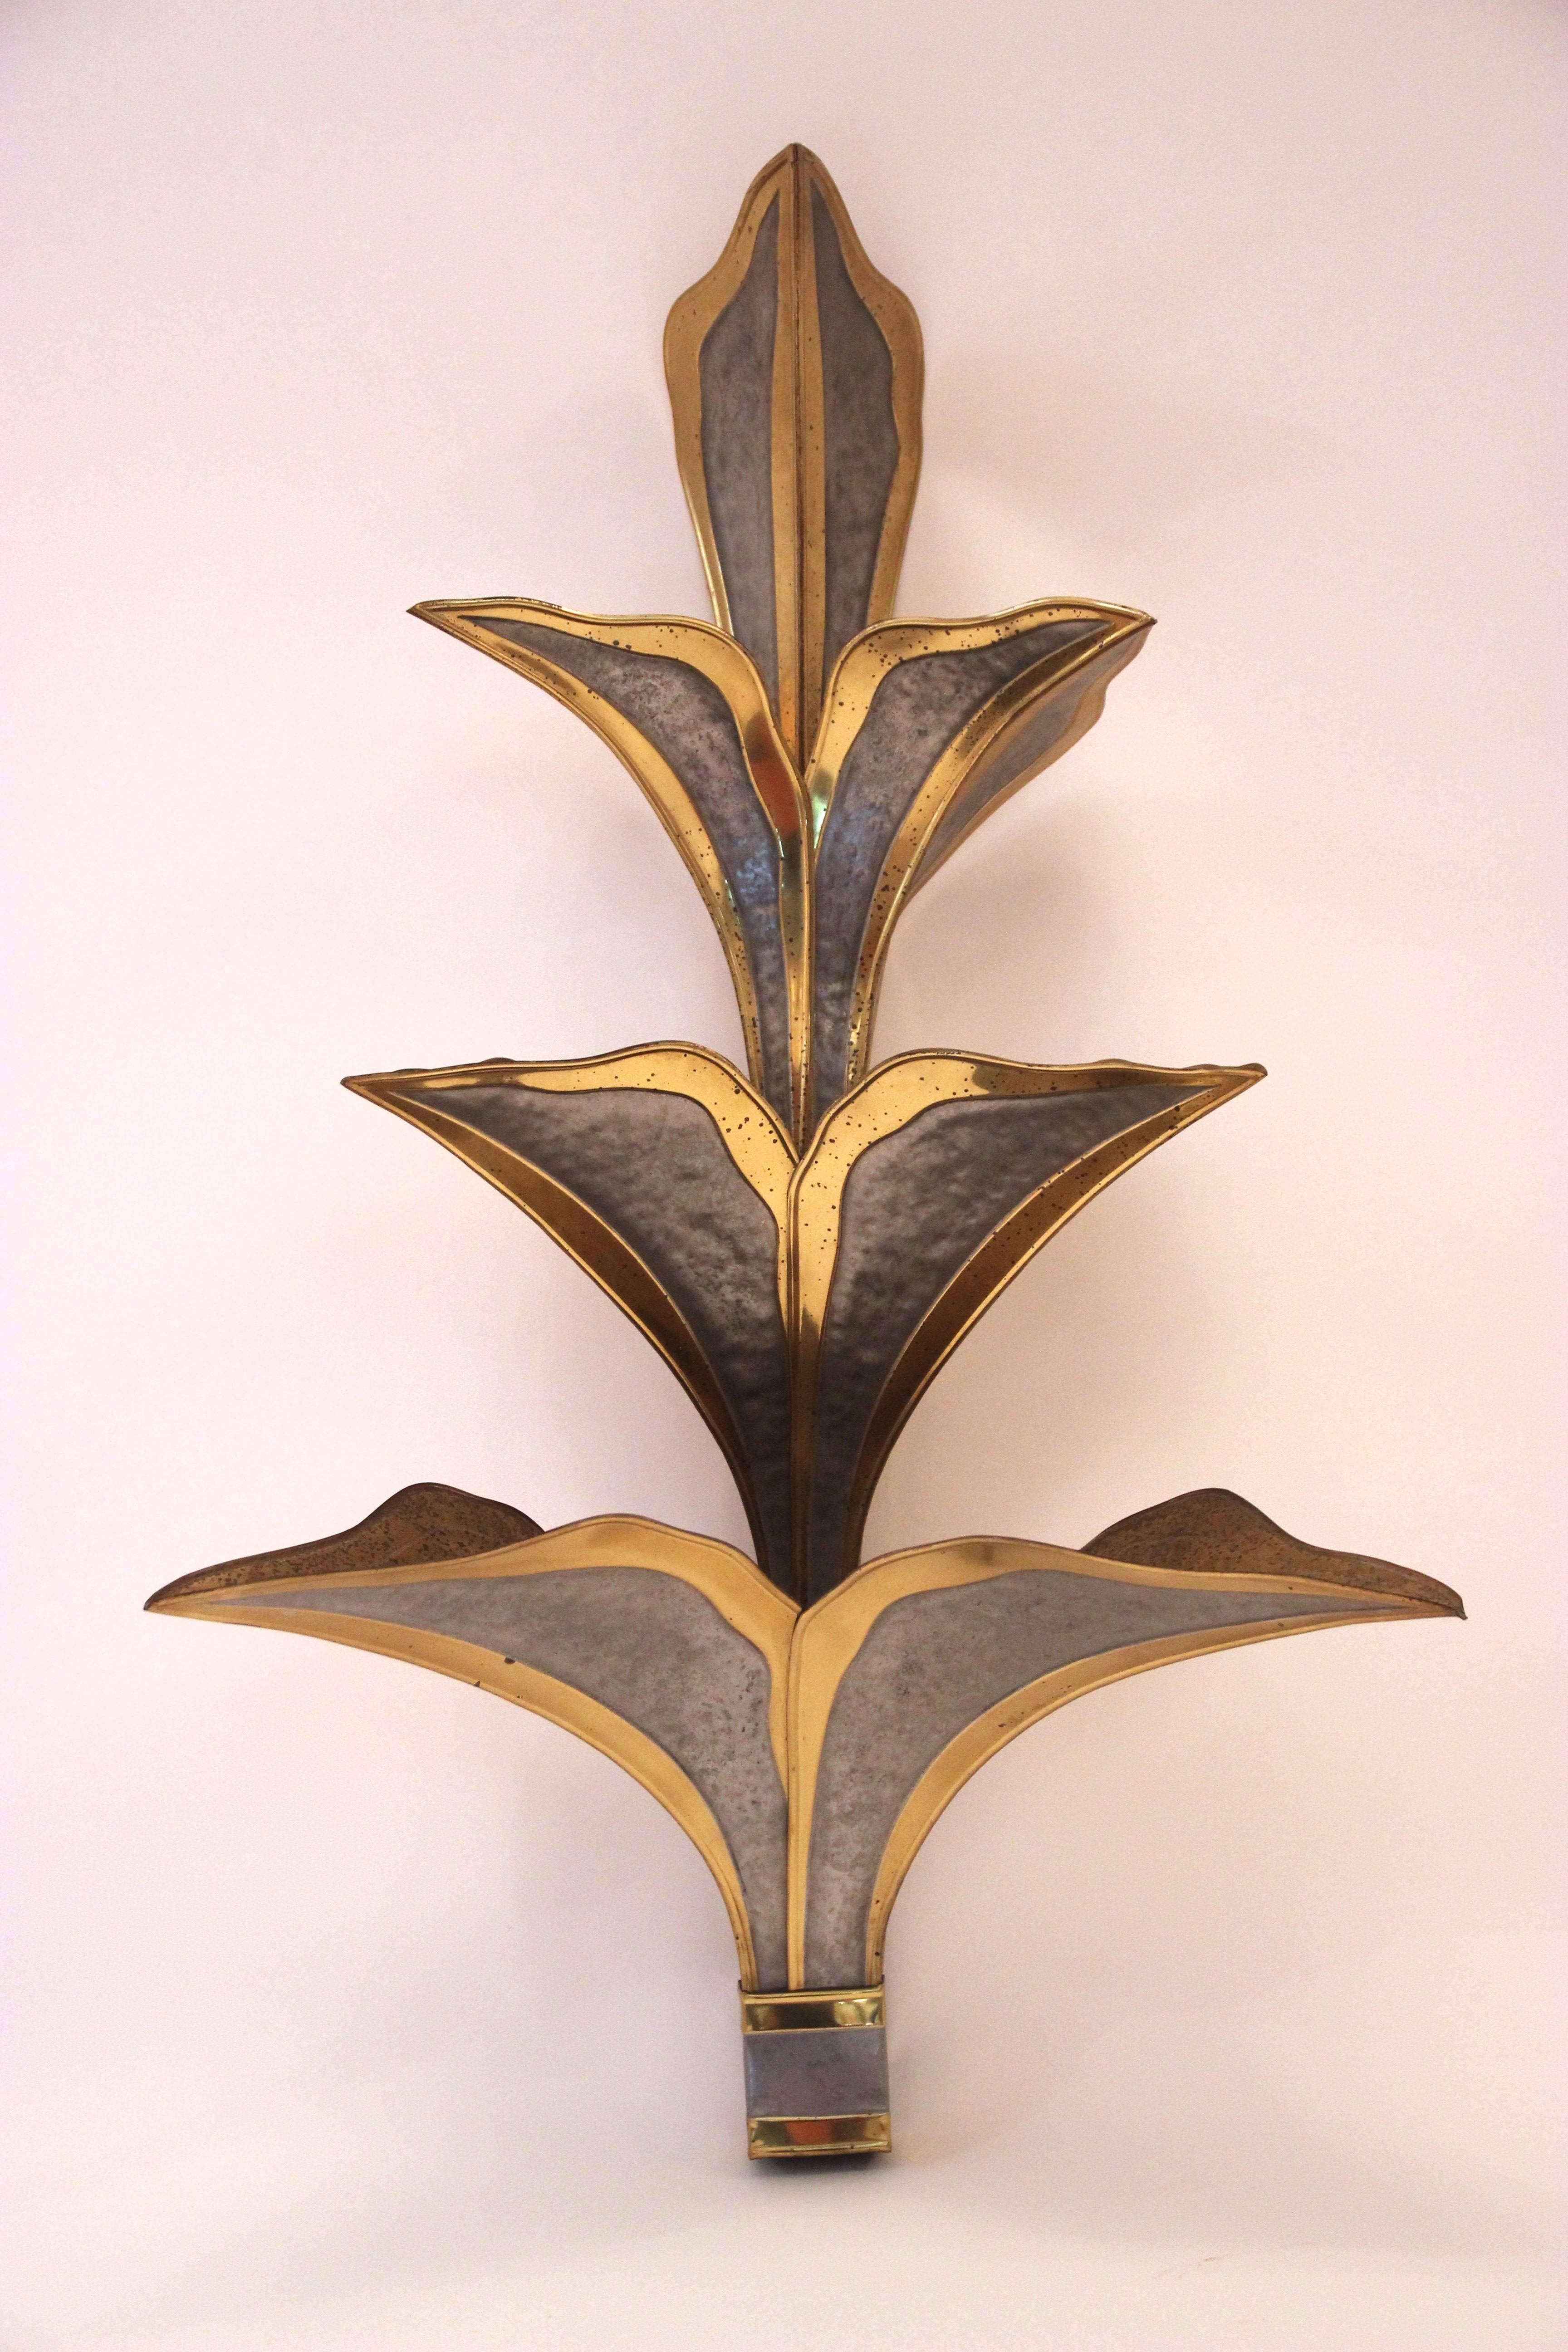 Maison Jansen,
pair of sconces,
gold-plated brass and metal,
circa 1970, France.
Measures: Height 85 cm, width 49 cm, depth 24 cm.